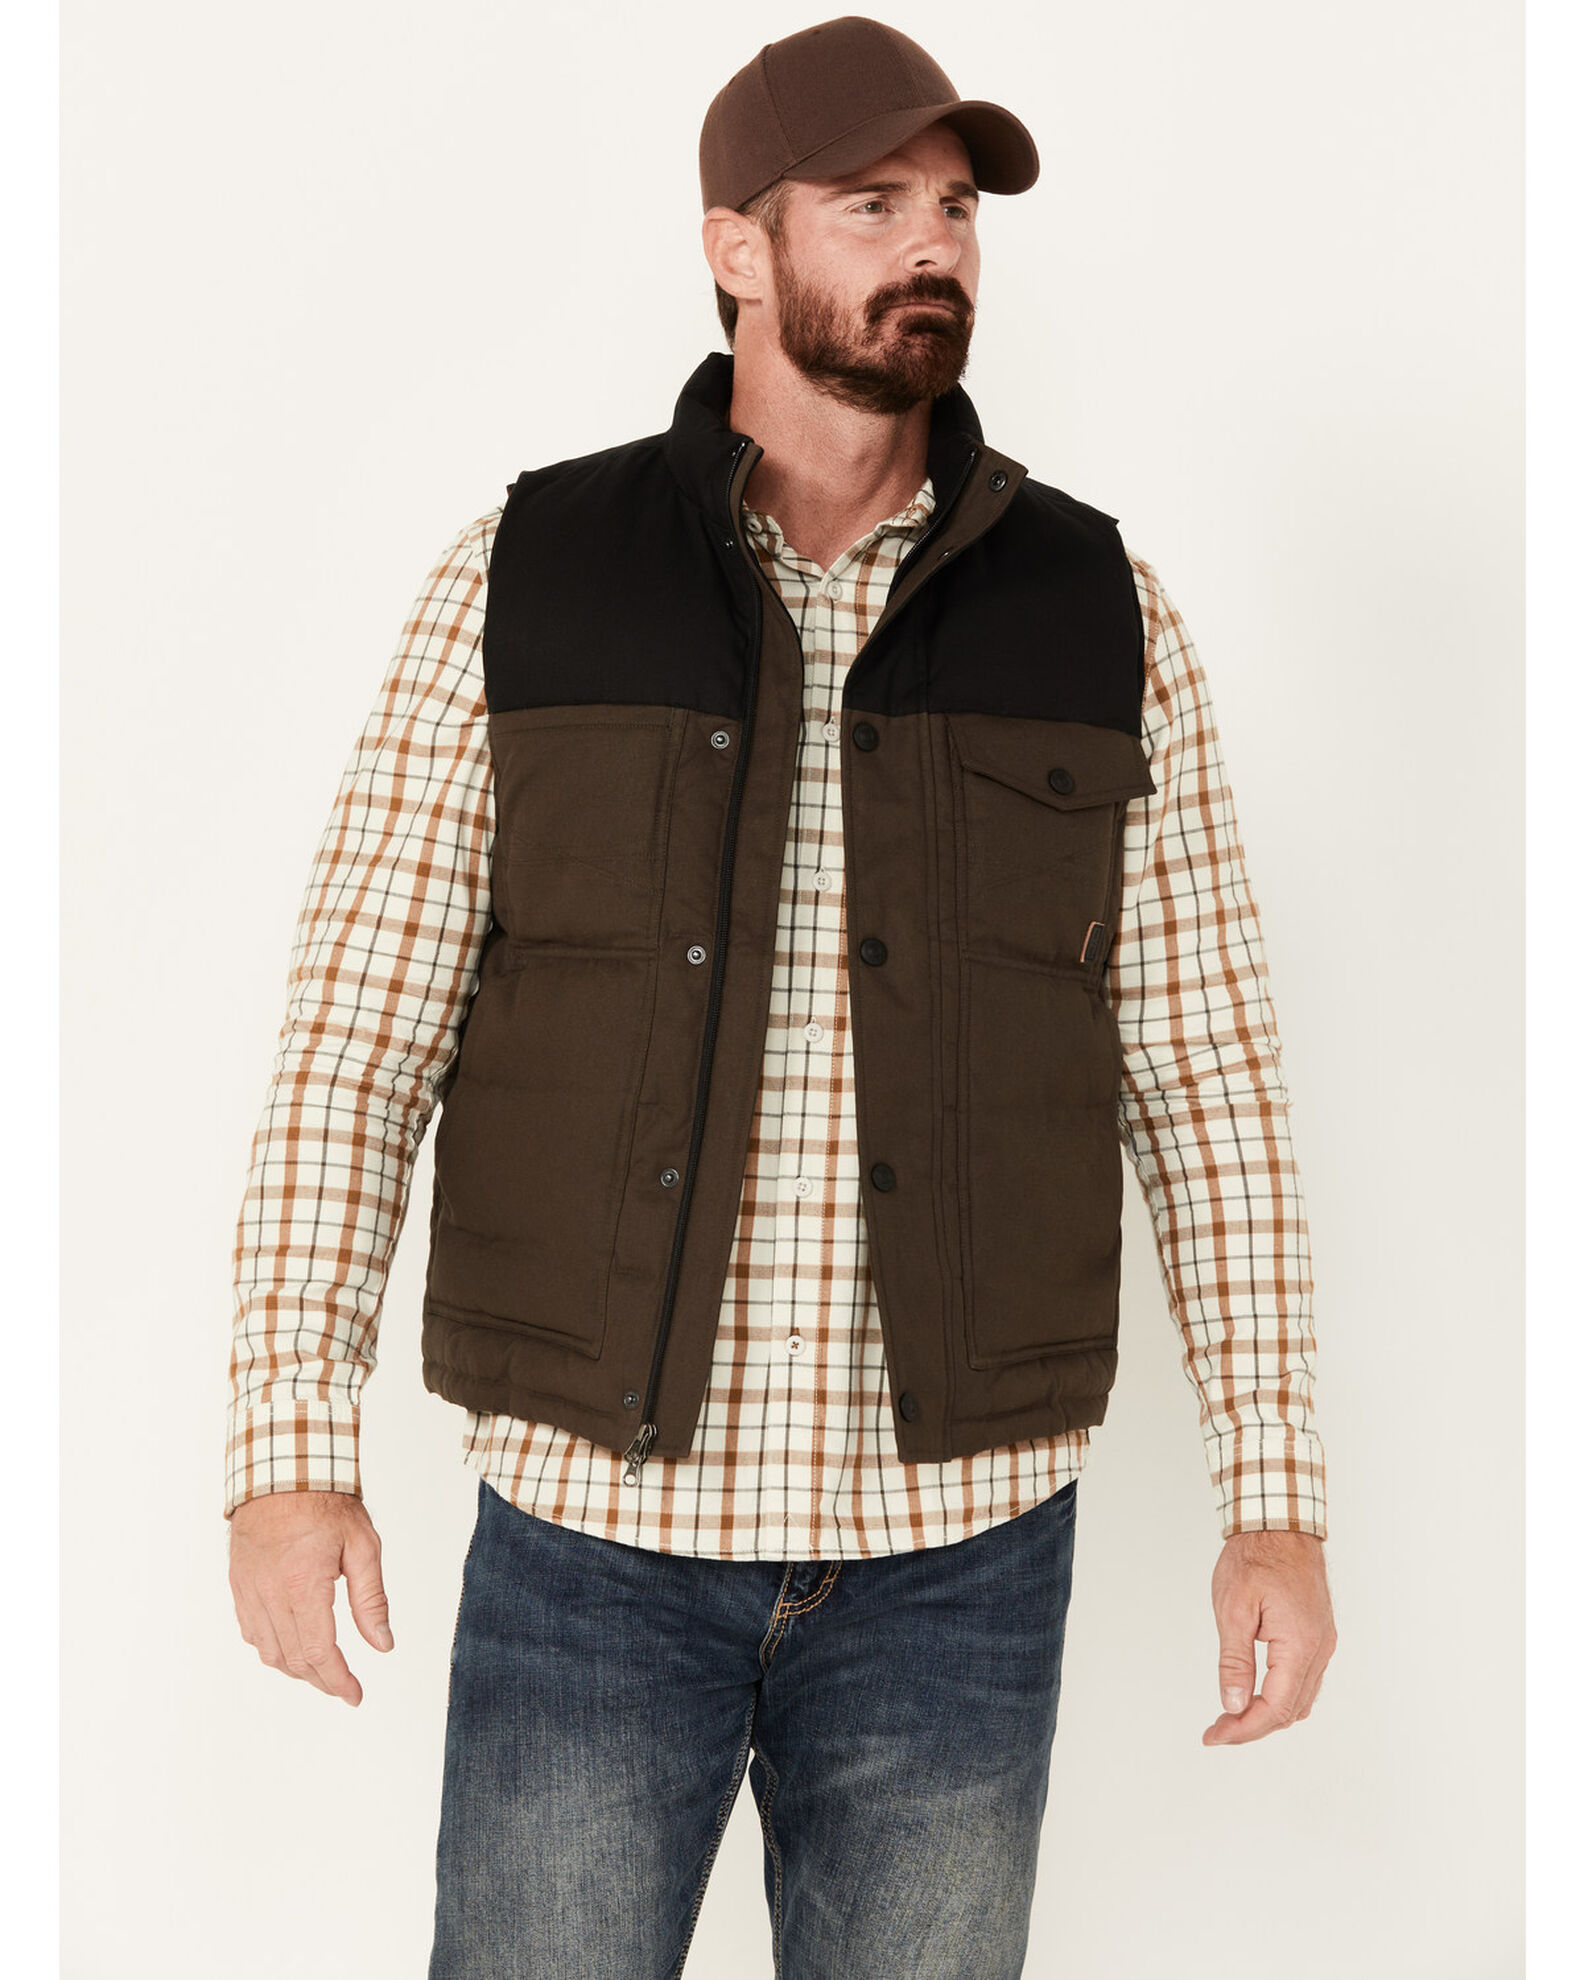 Brothers & Sons Men's Utility Puffer Vest